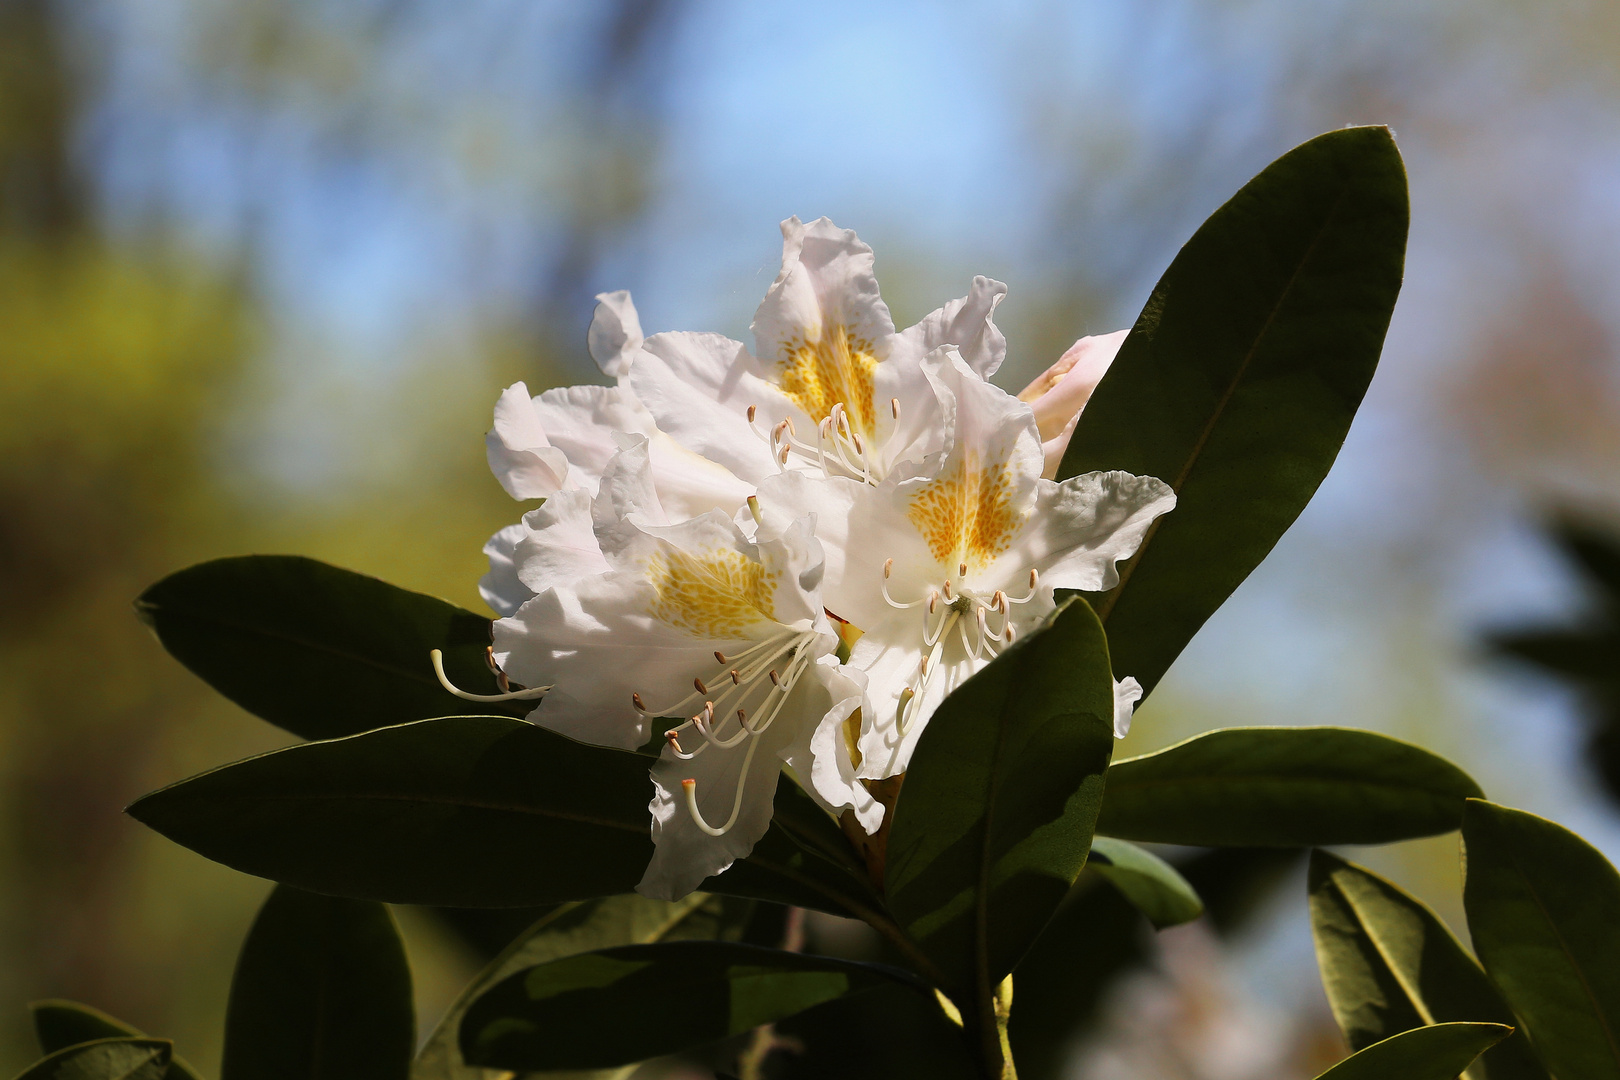 Rhododendron - Spring 2019